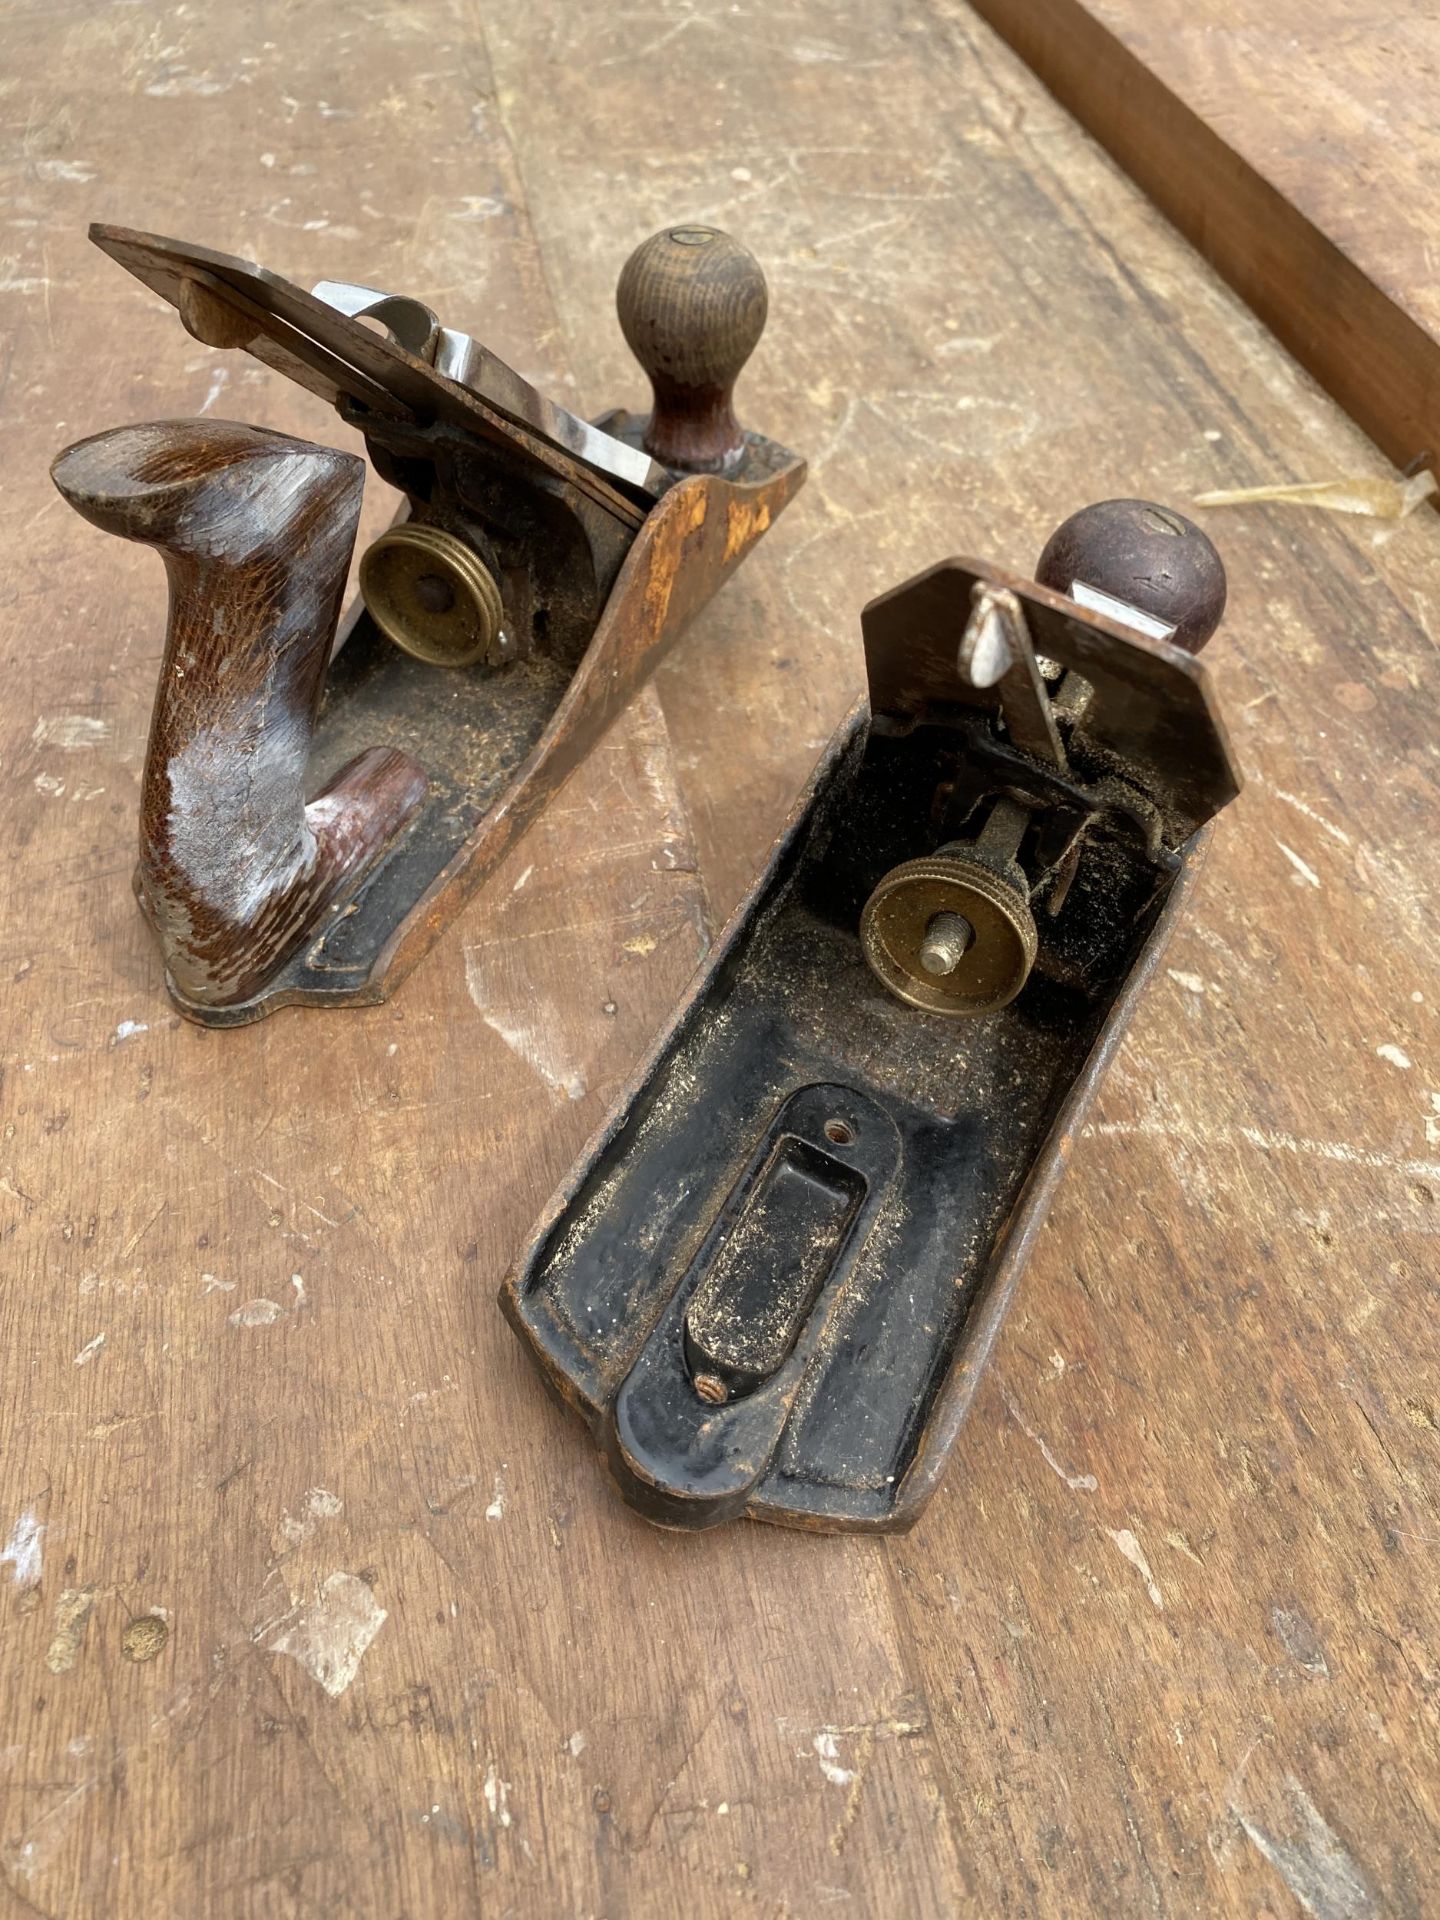 A STANLEY NO.4 WOOD PLANE AND A STANLEY NO.4 1/2 WOOD PLANE - Image 4 of 4